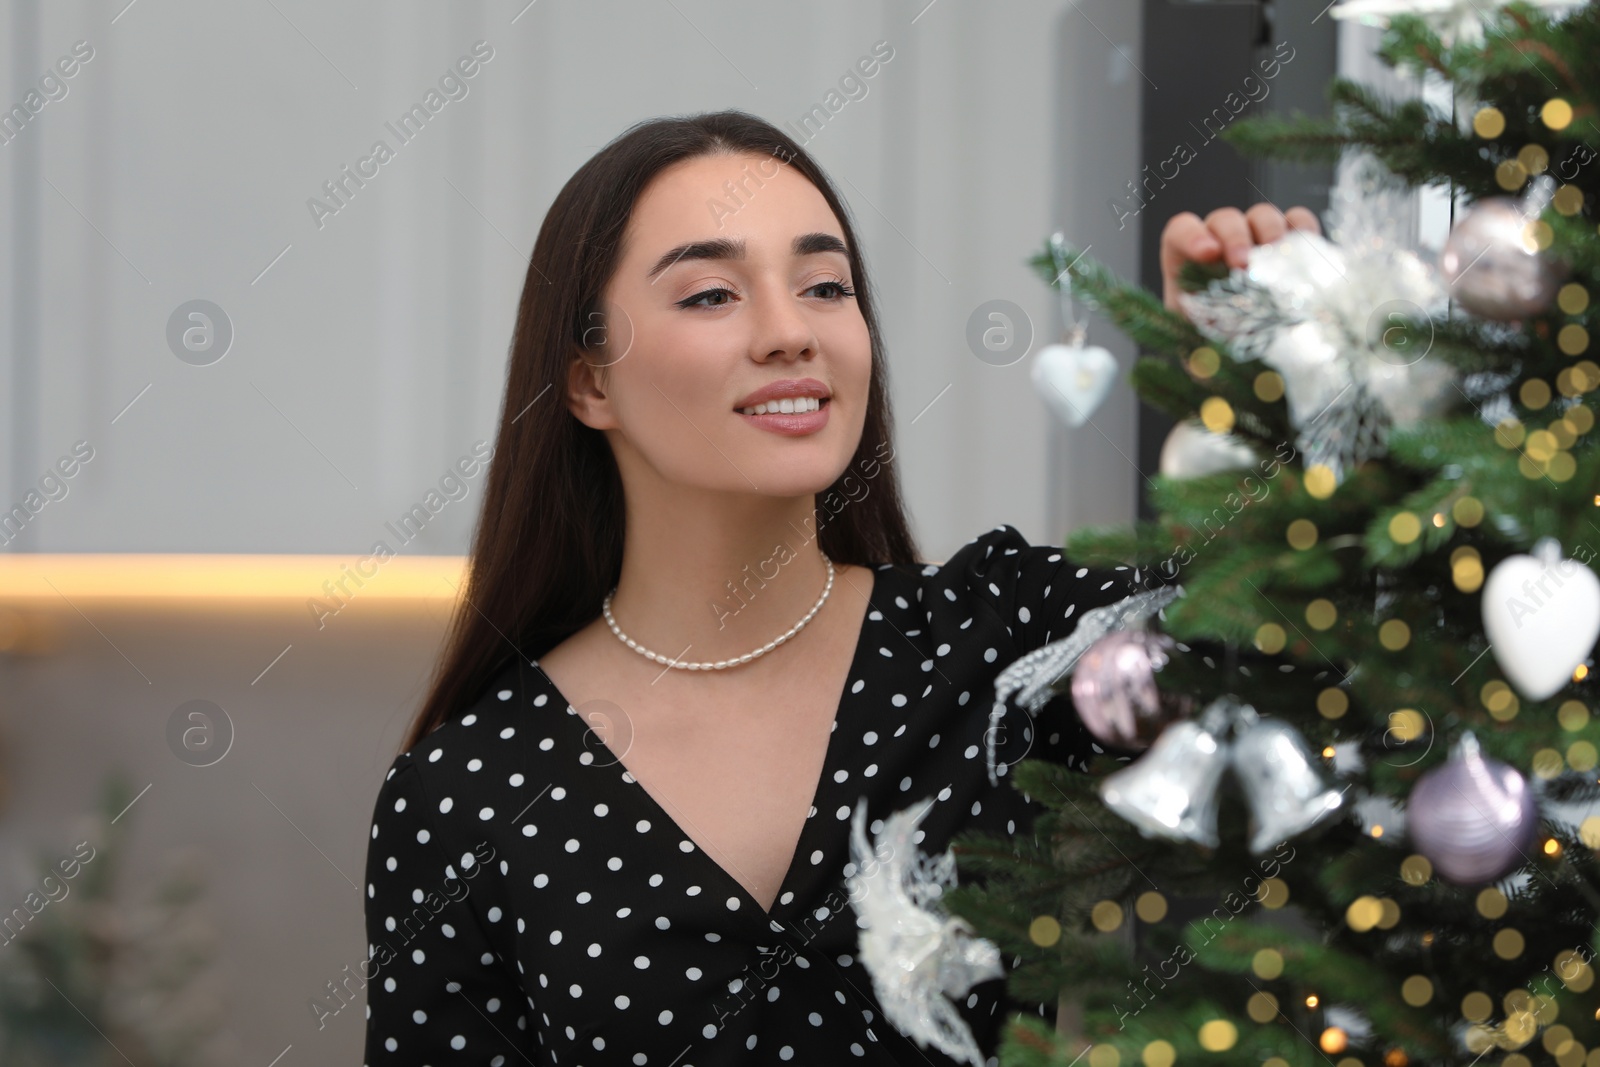 Photo of Smiling woman decorating Christmas tree in room